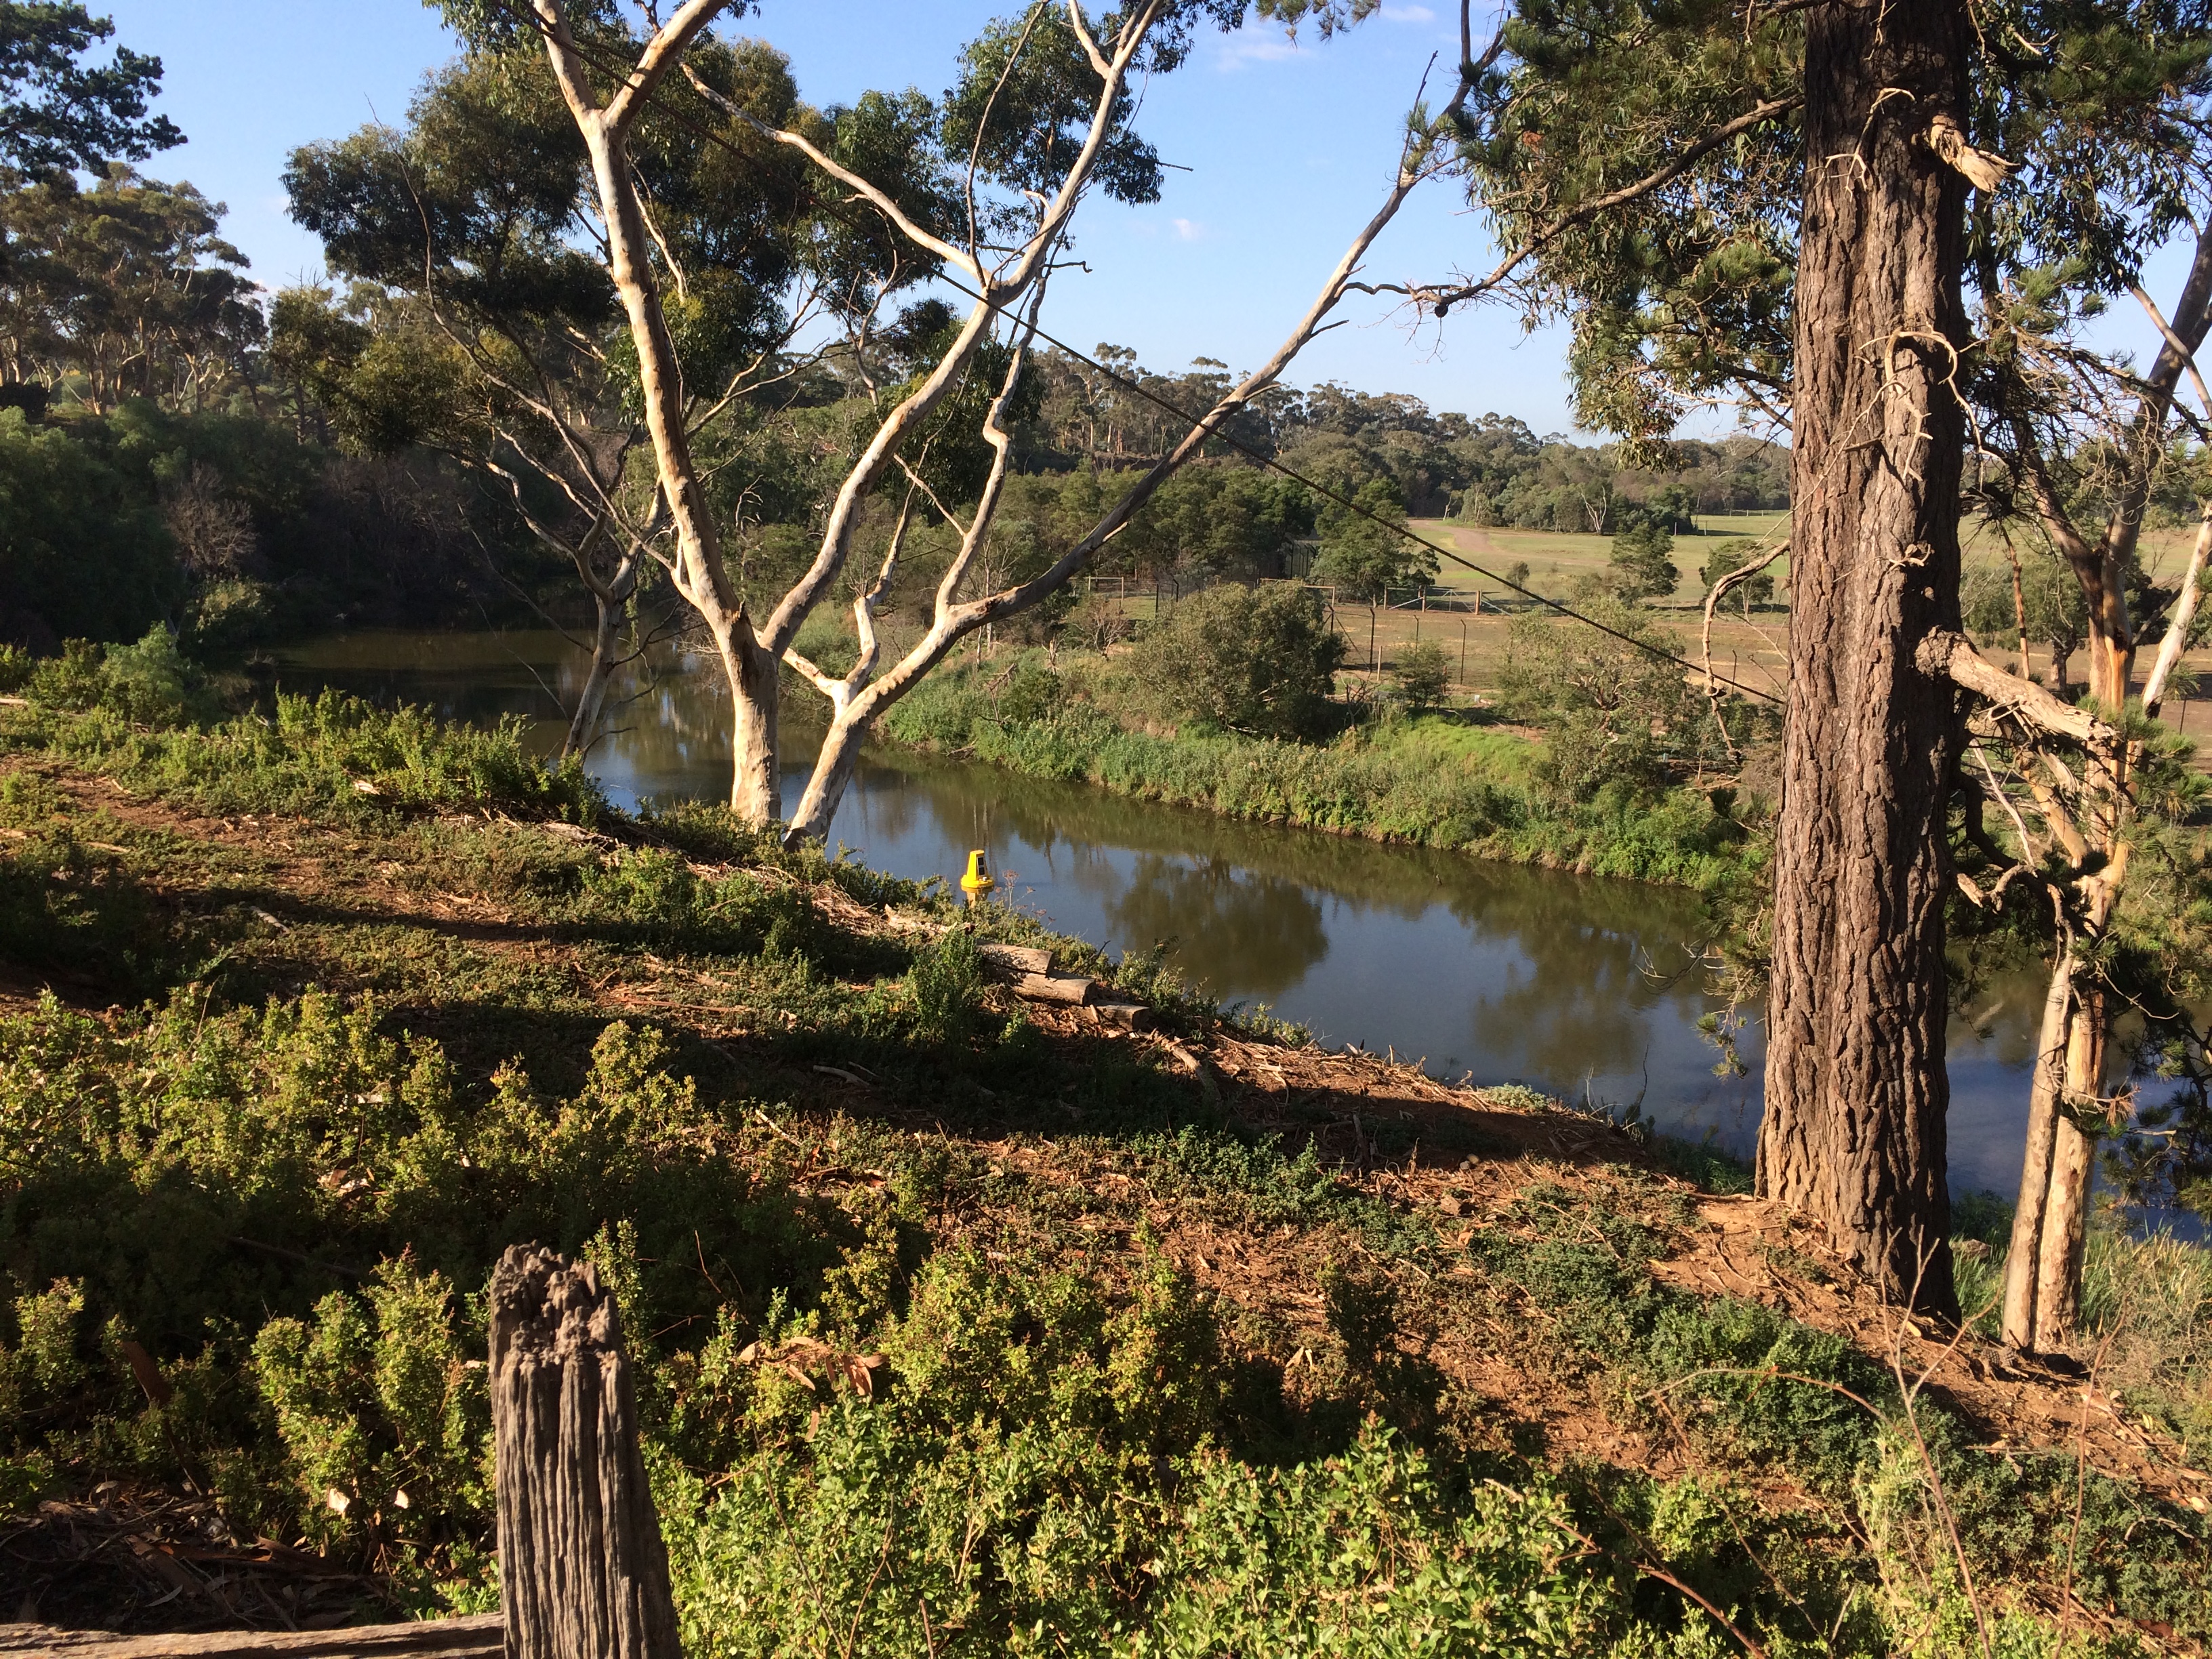 Lower Werribee River after environmental watering on 16 March 2016, by Melbourne Water